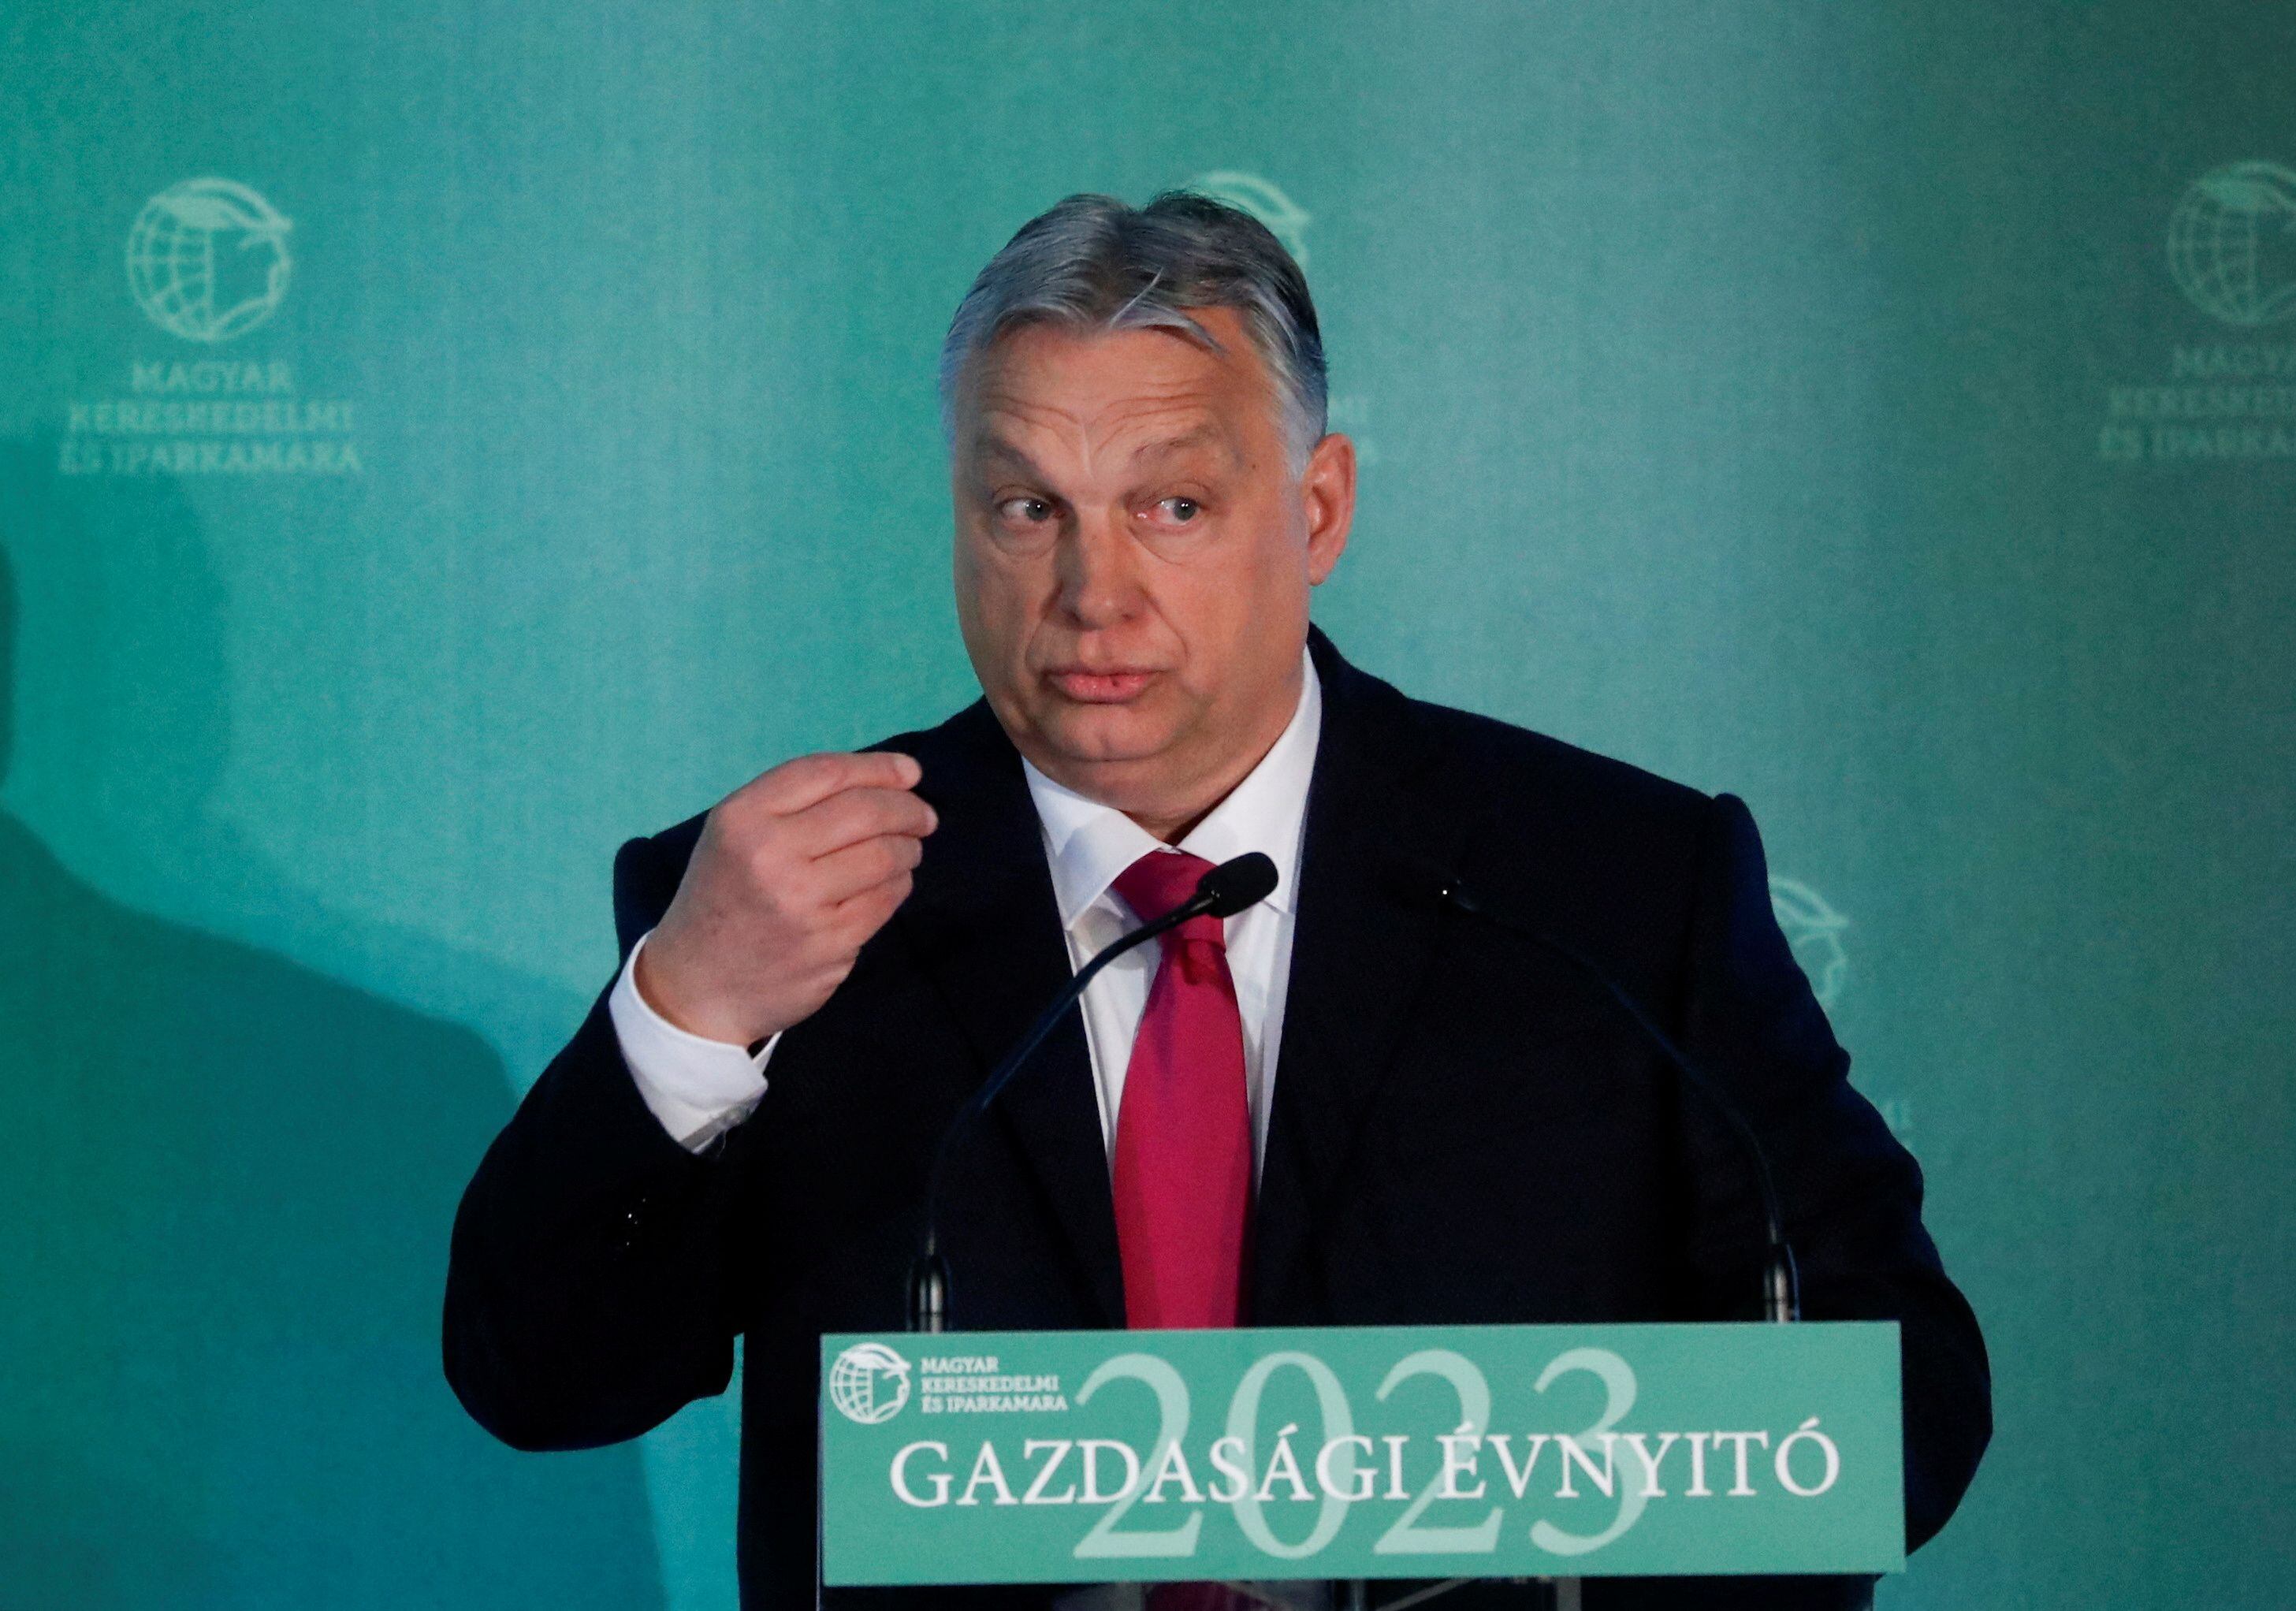 Hungarian Prime Minister Viktor Orban speaks during a business conference in Budapest, Hungary, March 9, 2023. REUTERS/Bernadett Szabo